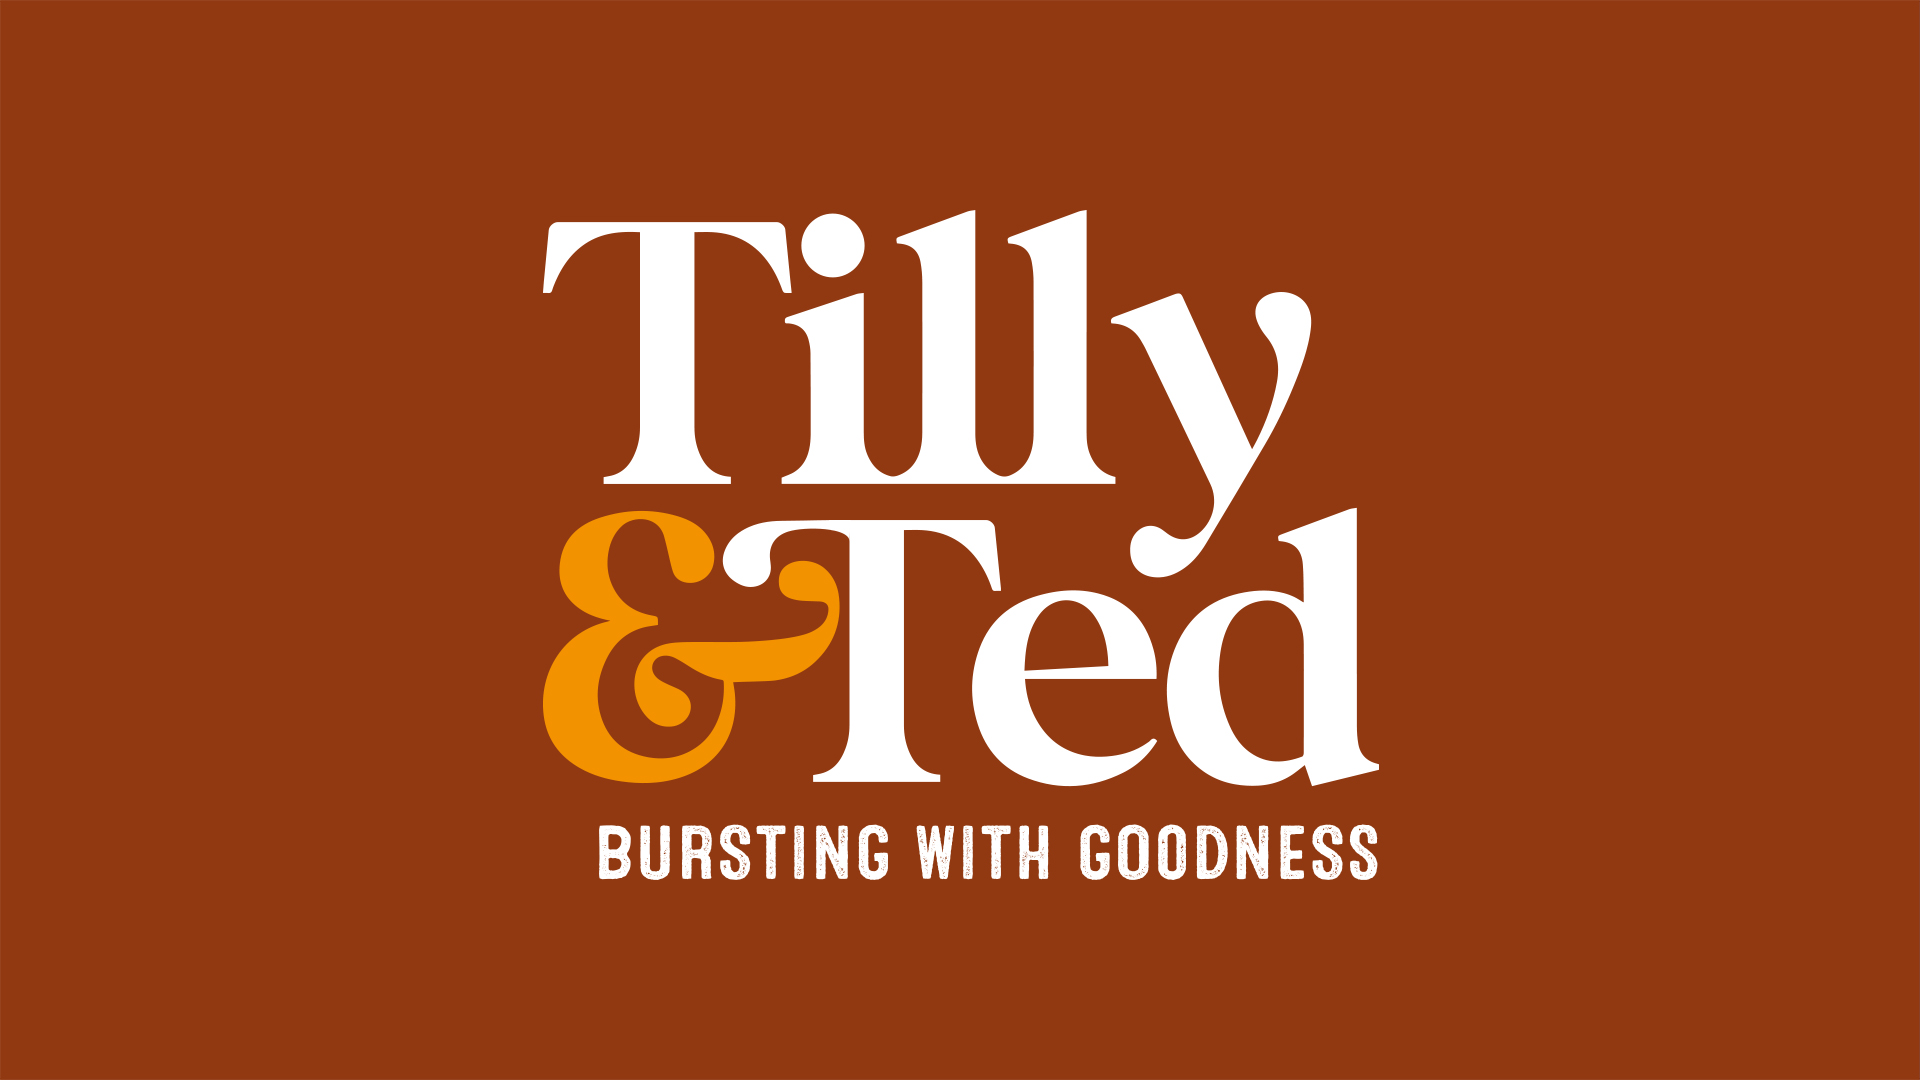 Slice Design's Unique and Playful Packaging for New Pet Food Brand Tilly & Ted